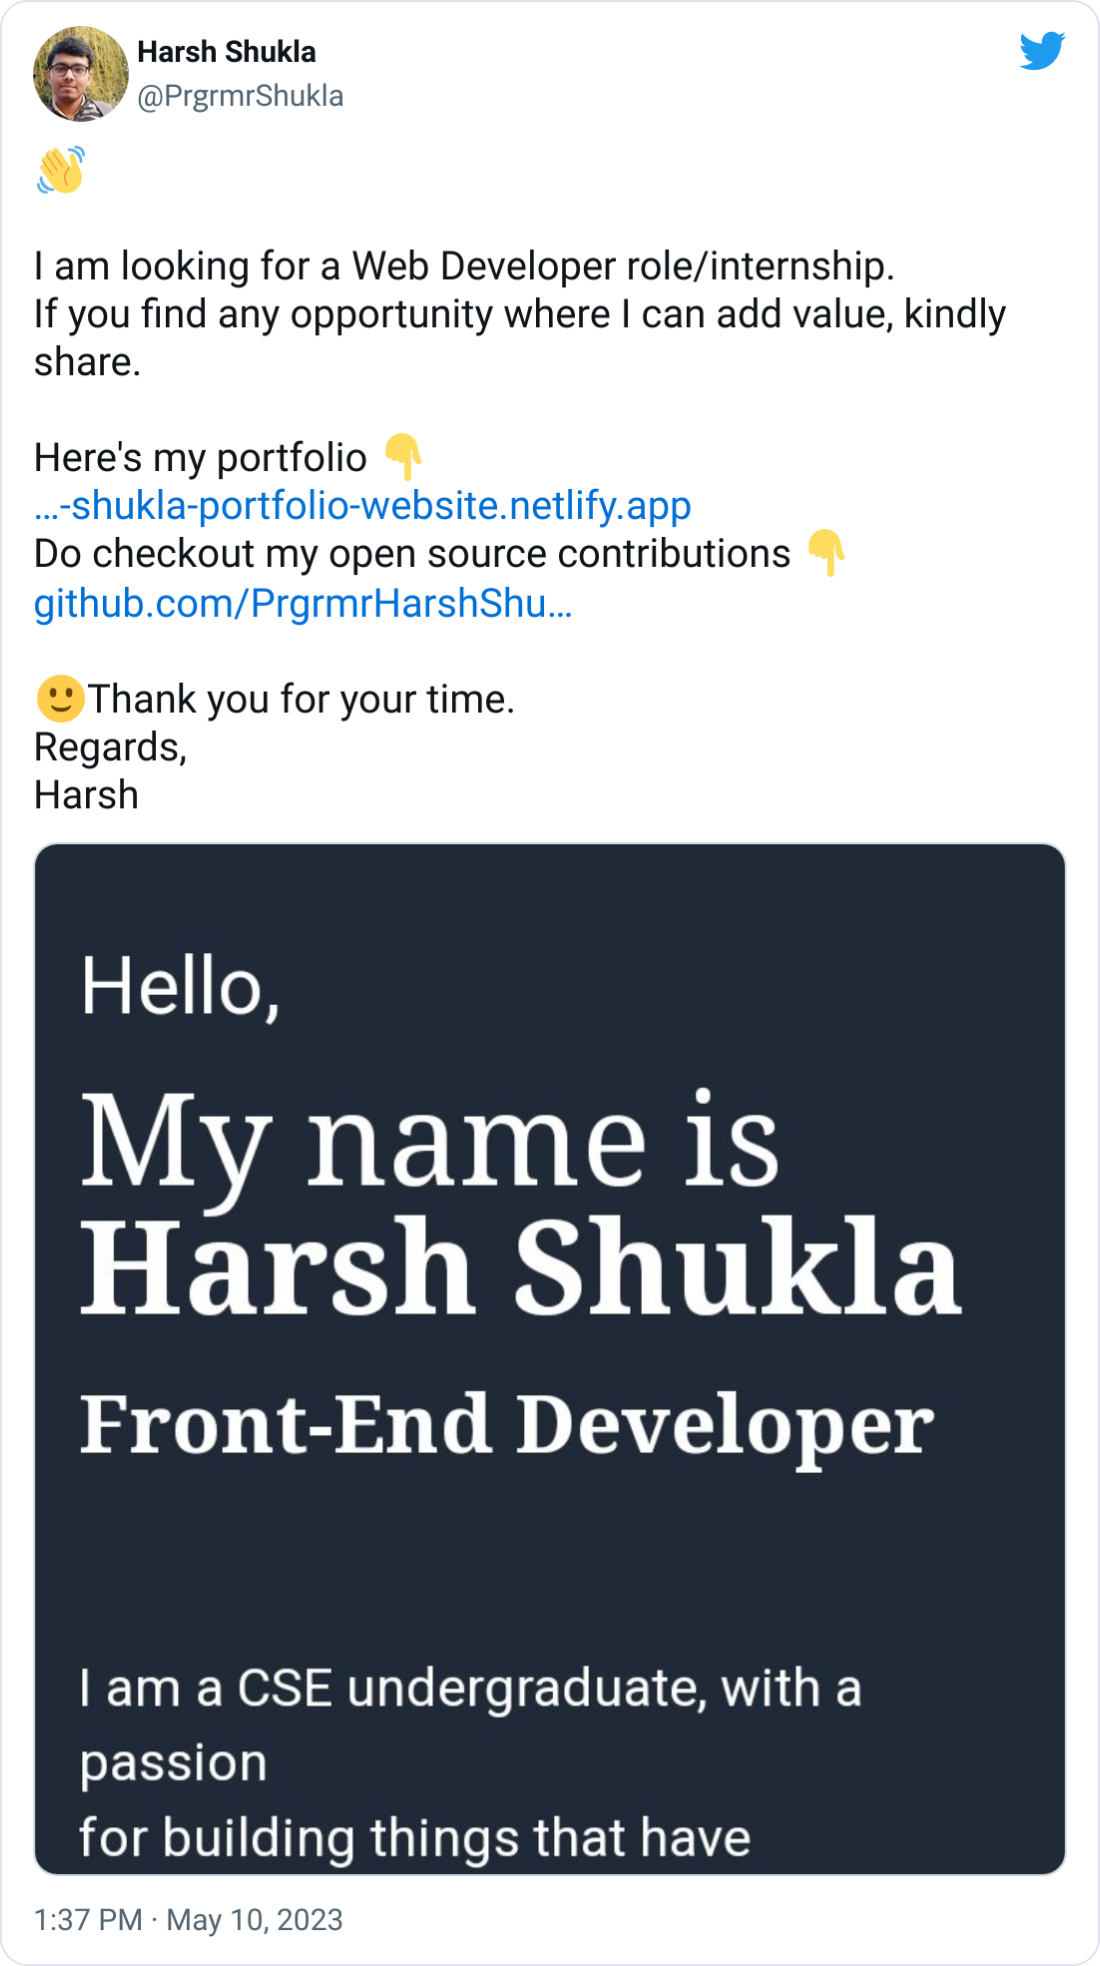 Harsh Shukla @PrgrmrShukla 👋  I am looking for a Web Developer role/internship. If you find any opportunity where I can add value, kindly share.  Here's my portfolio 👇 https://harsh-shukla-portfolio-website.netlify.app Do checkout my open source contributions 👇 https://github.com/PrgrmrHarshShukla  🙂Thank you for your time. Regards, Harsh